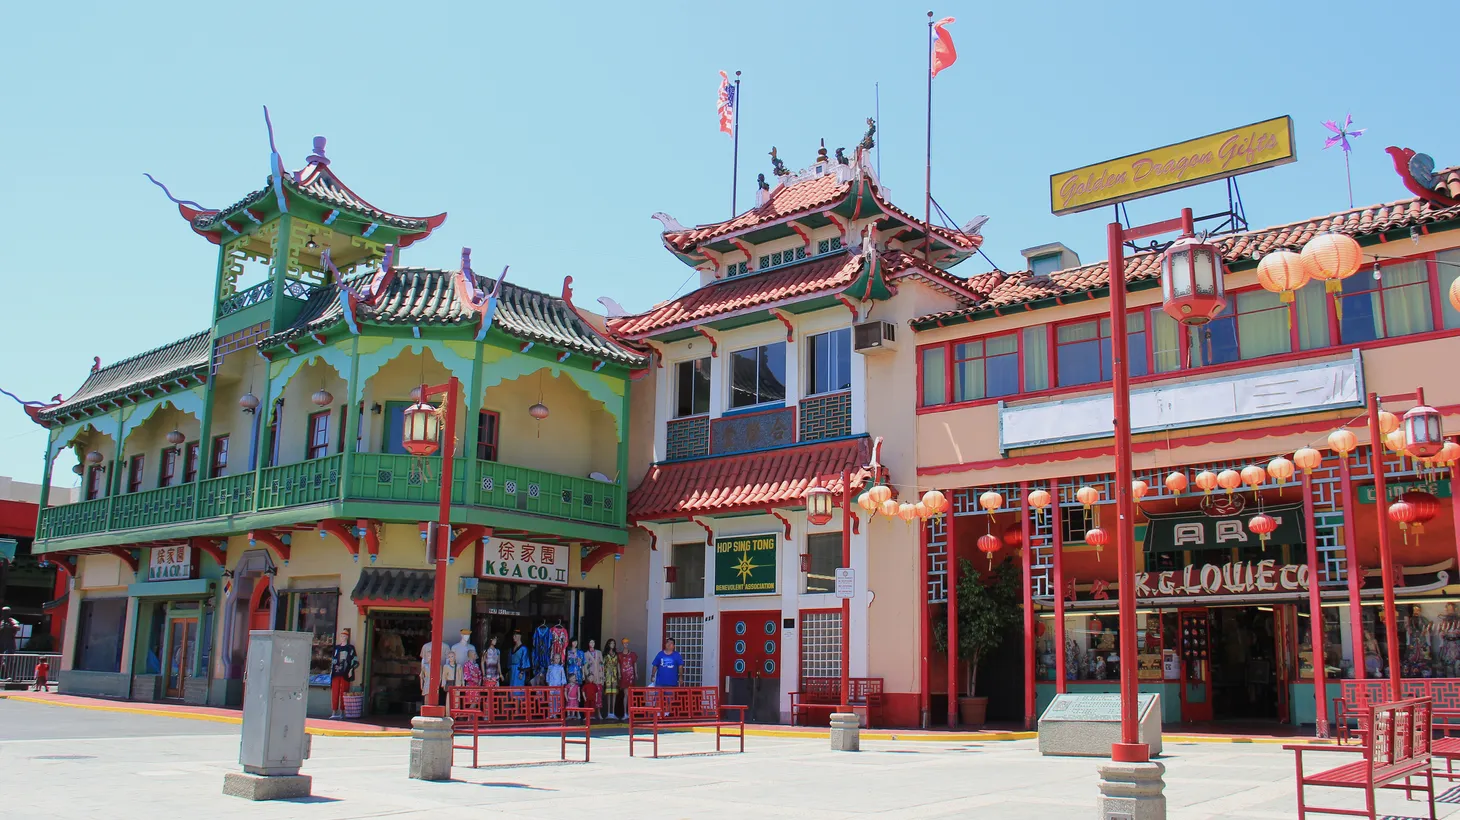 “They look at Chinatown, and they see it as a place where people are visiting on the weekends and at night to come eat. But then once the sun goes down, they are no longer in Chinatown. And then what's left is low-income residents. And a supermarket sees that and says, ‘We'd actually rather open up somewhere else,’” says reporter Andrea Chang.